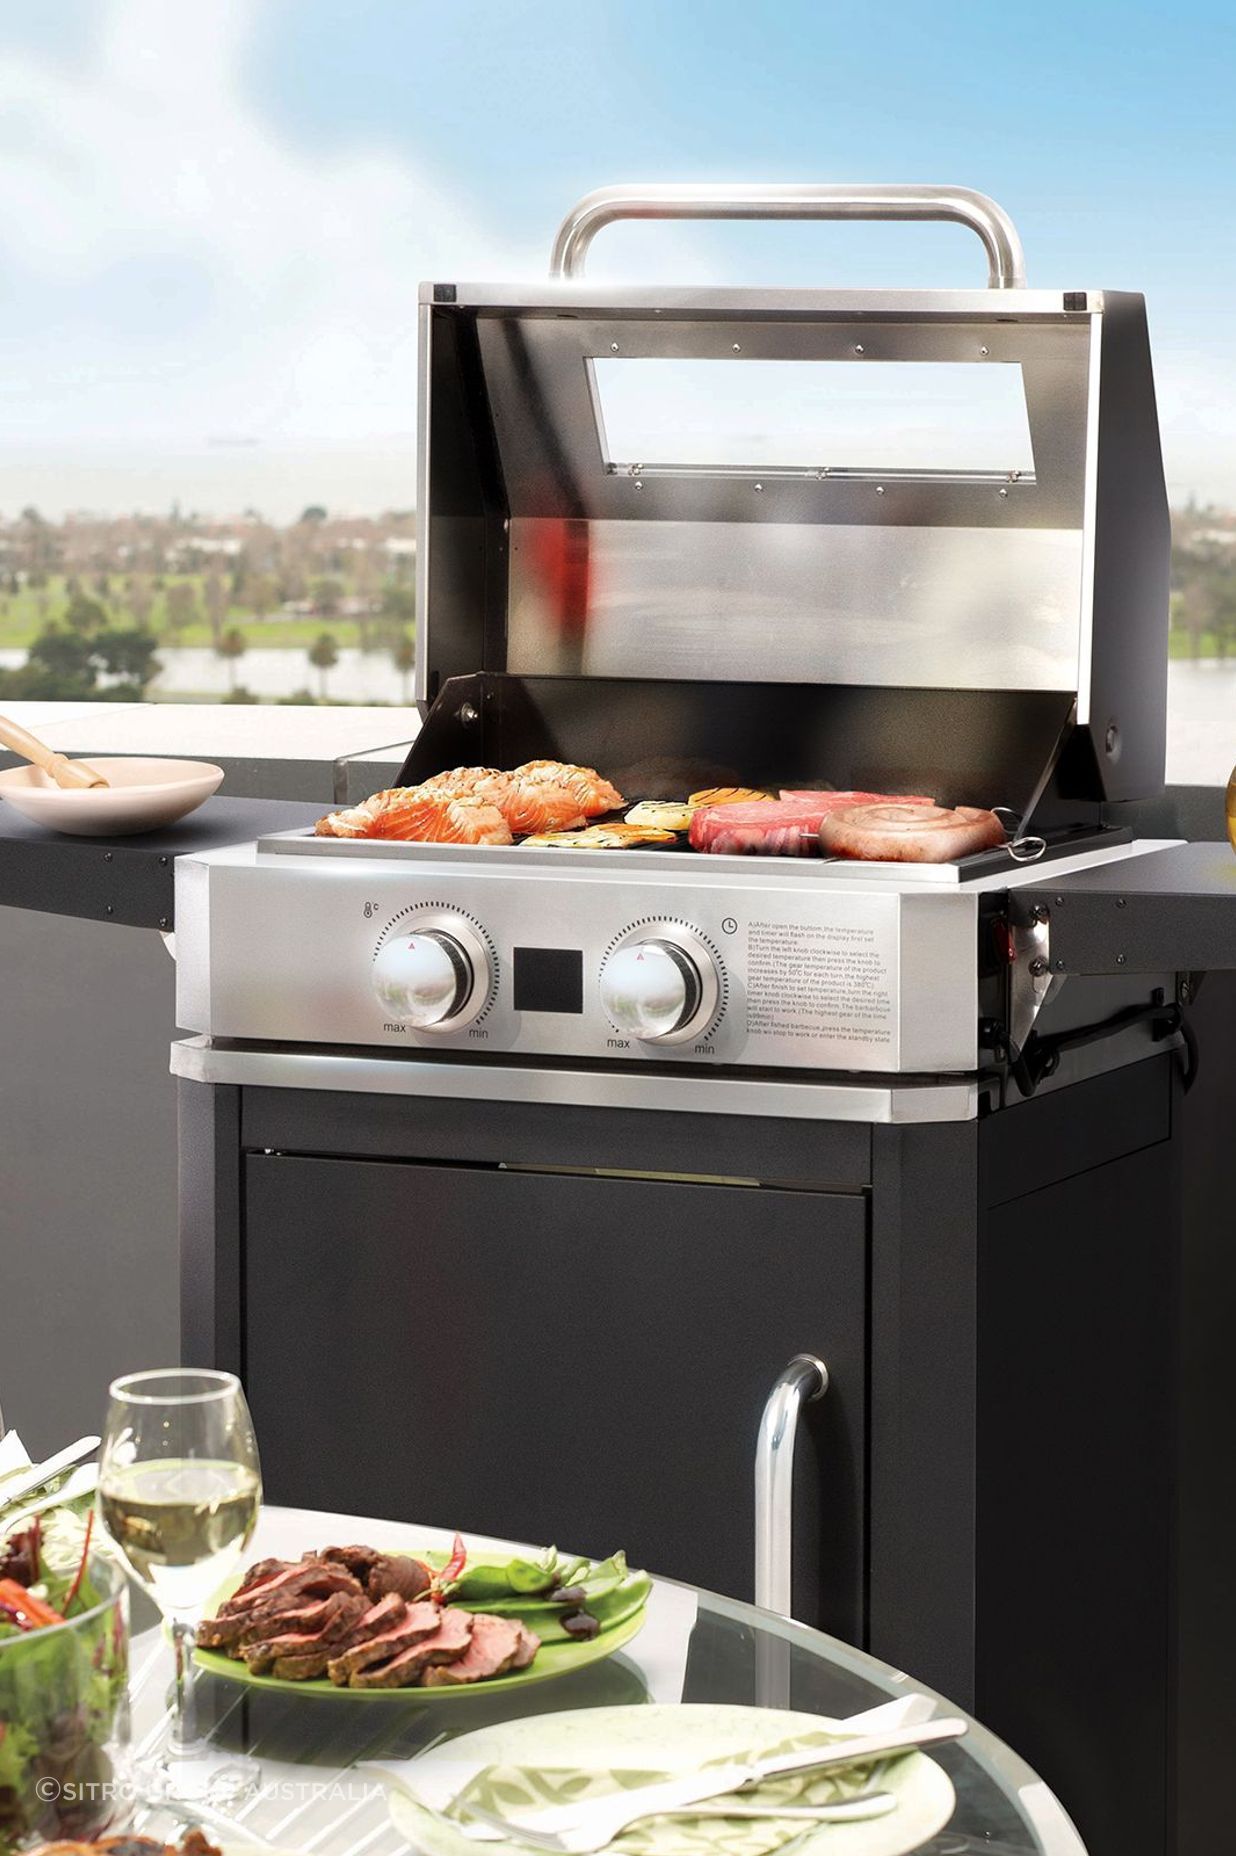 The Paragon Digital Electric BBQ is a stylish entry model